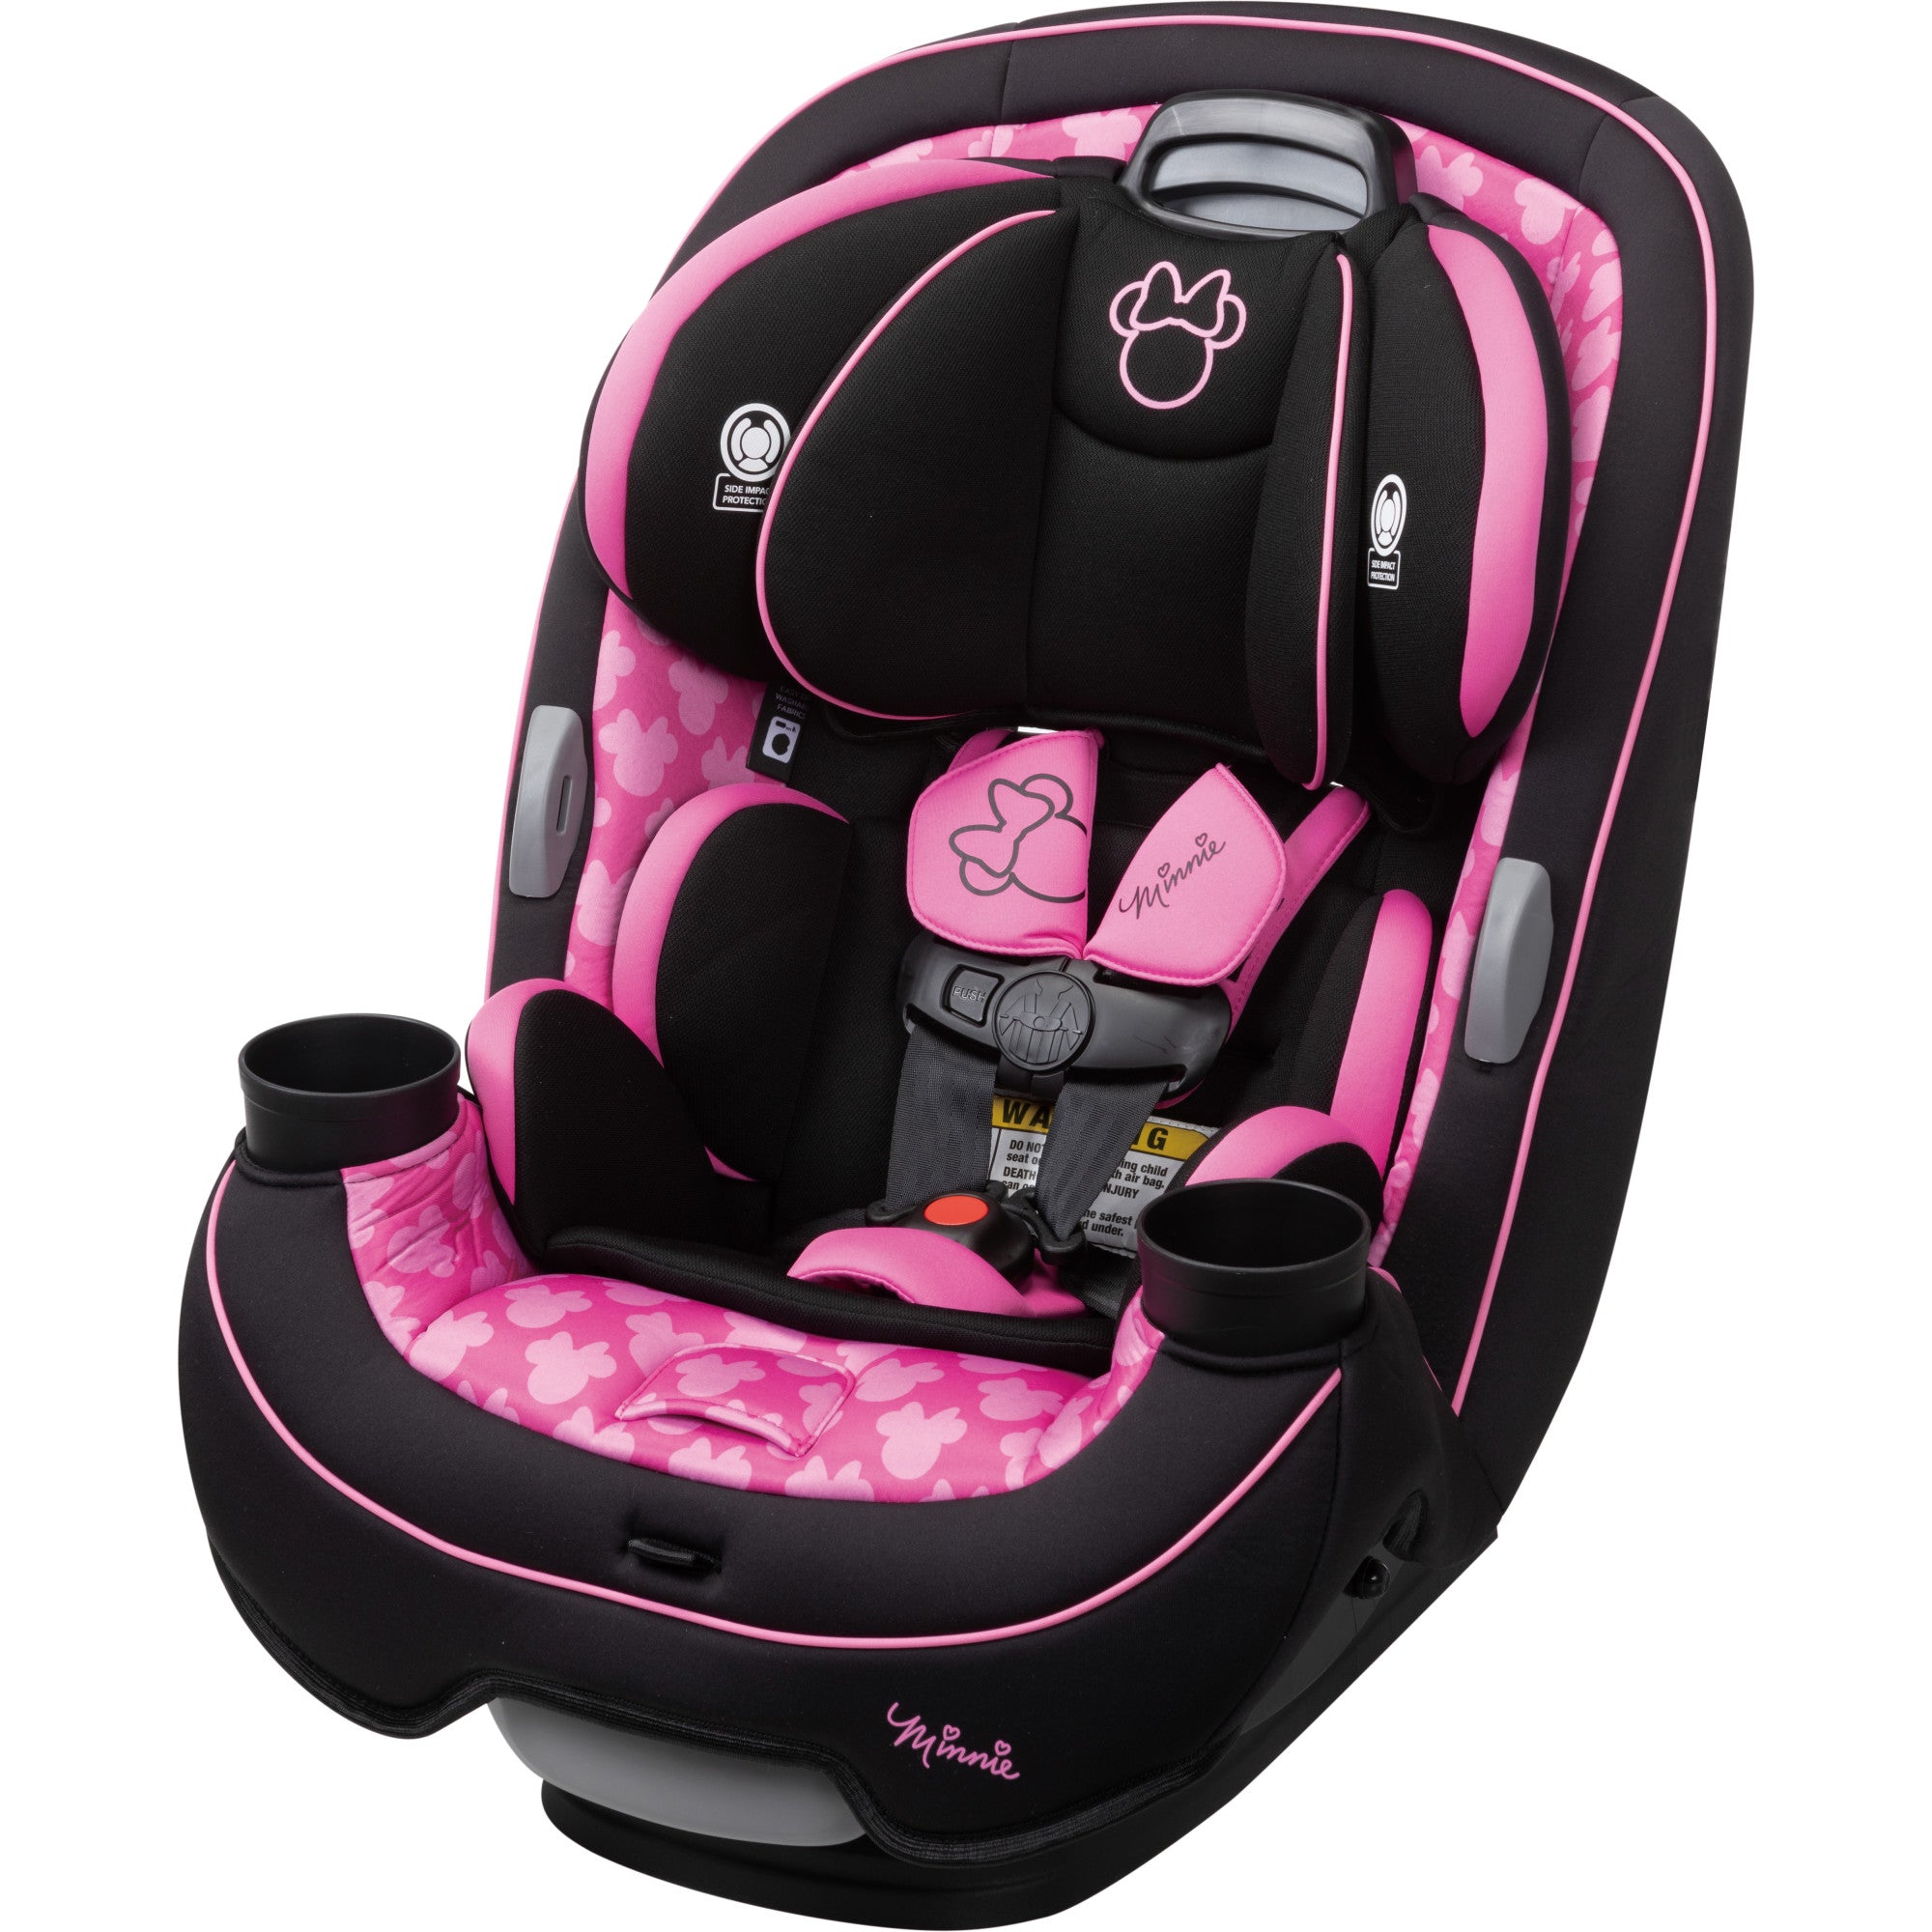 Disney Baby Grow and Go™ All-in-One Convertible Car Seat - Minnie